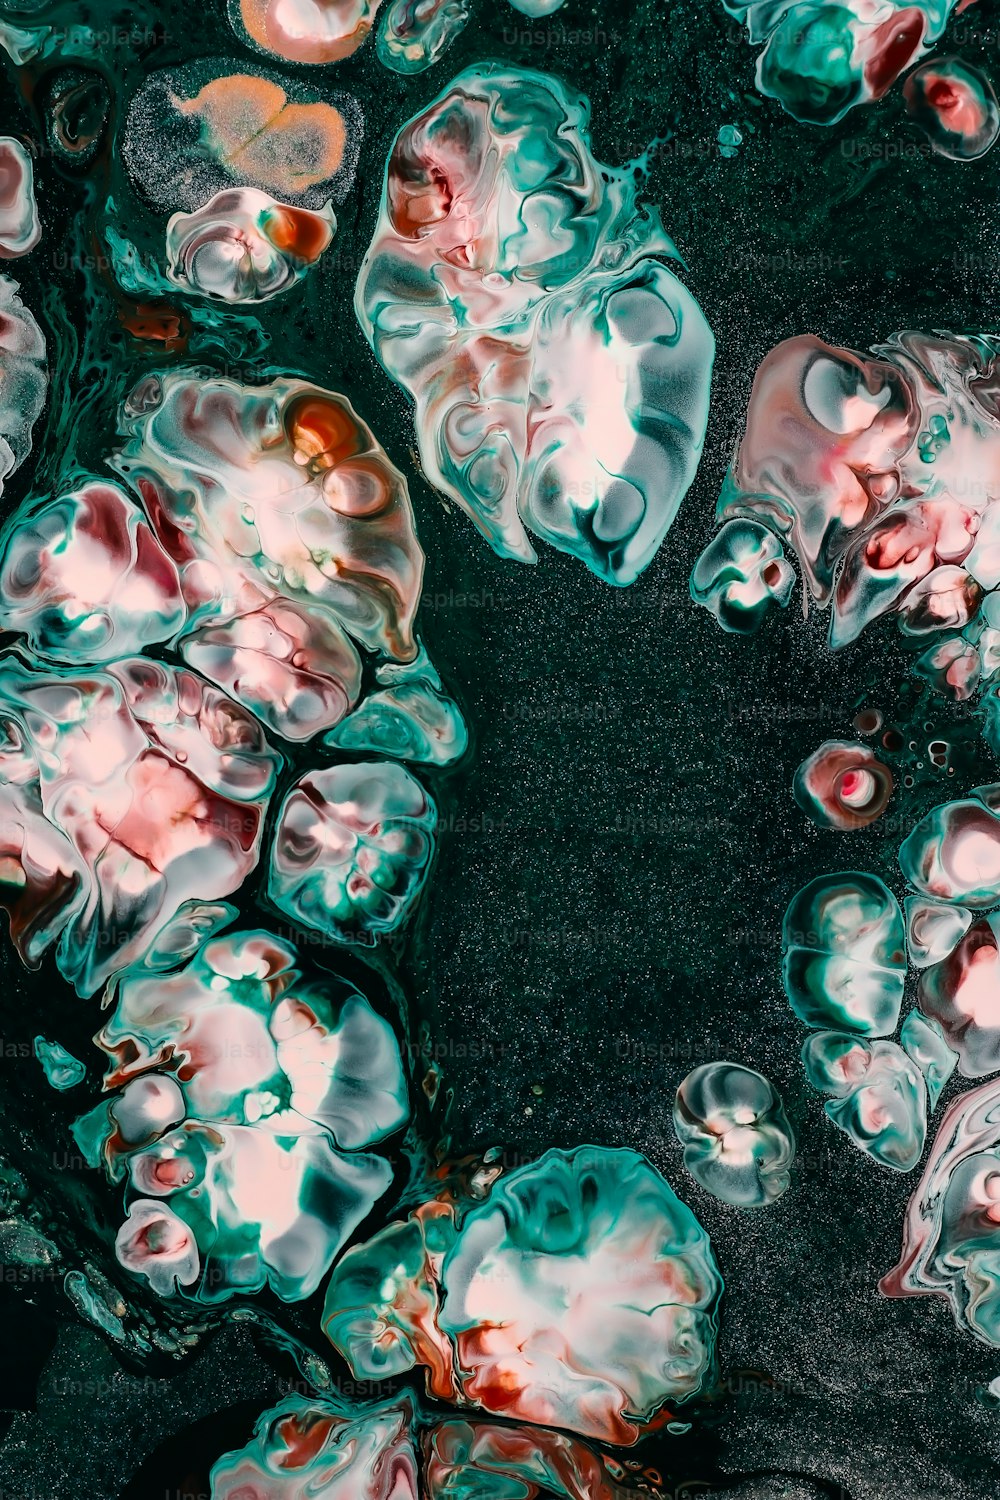 a group of jelly like objects floating in water